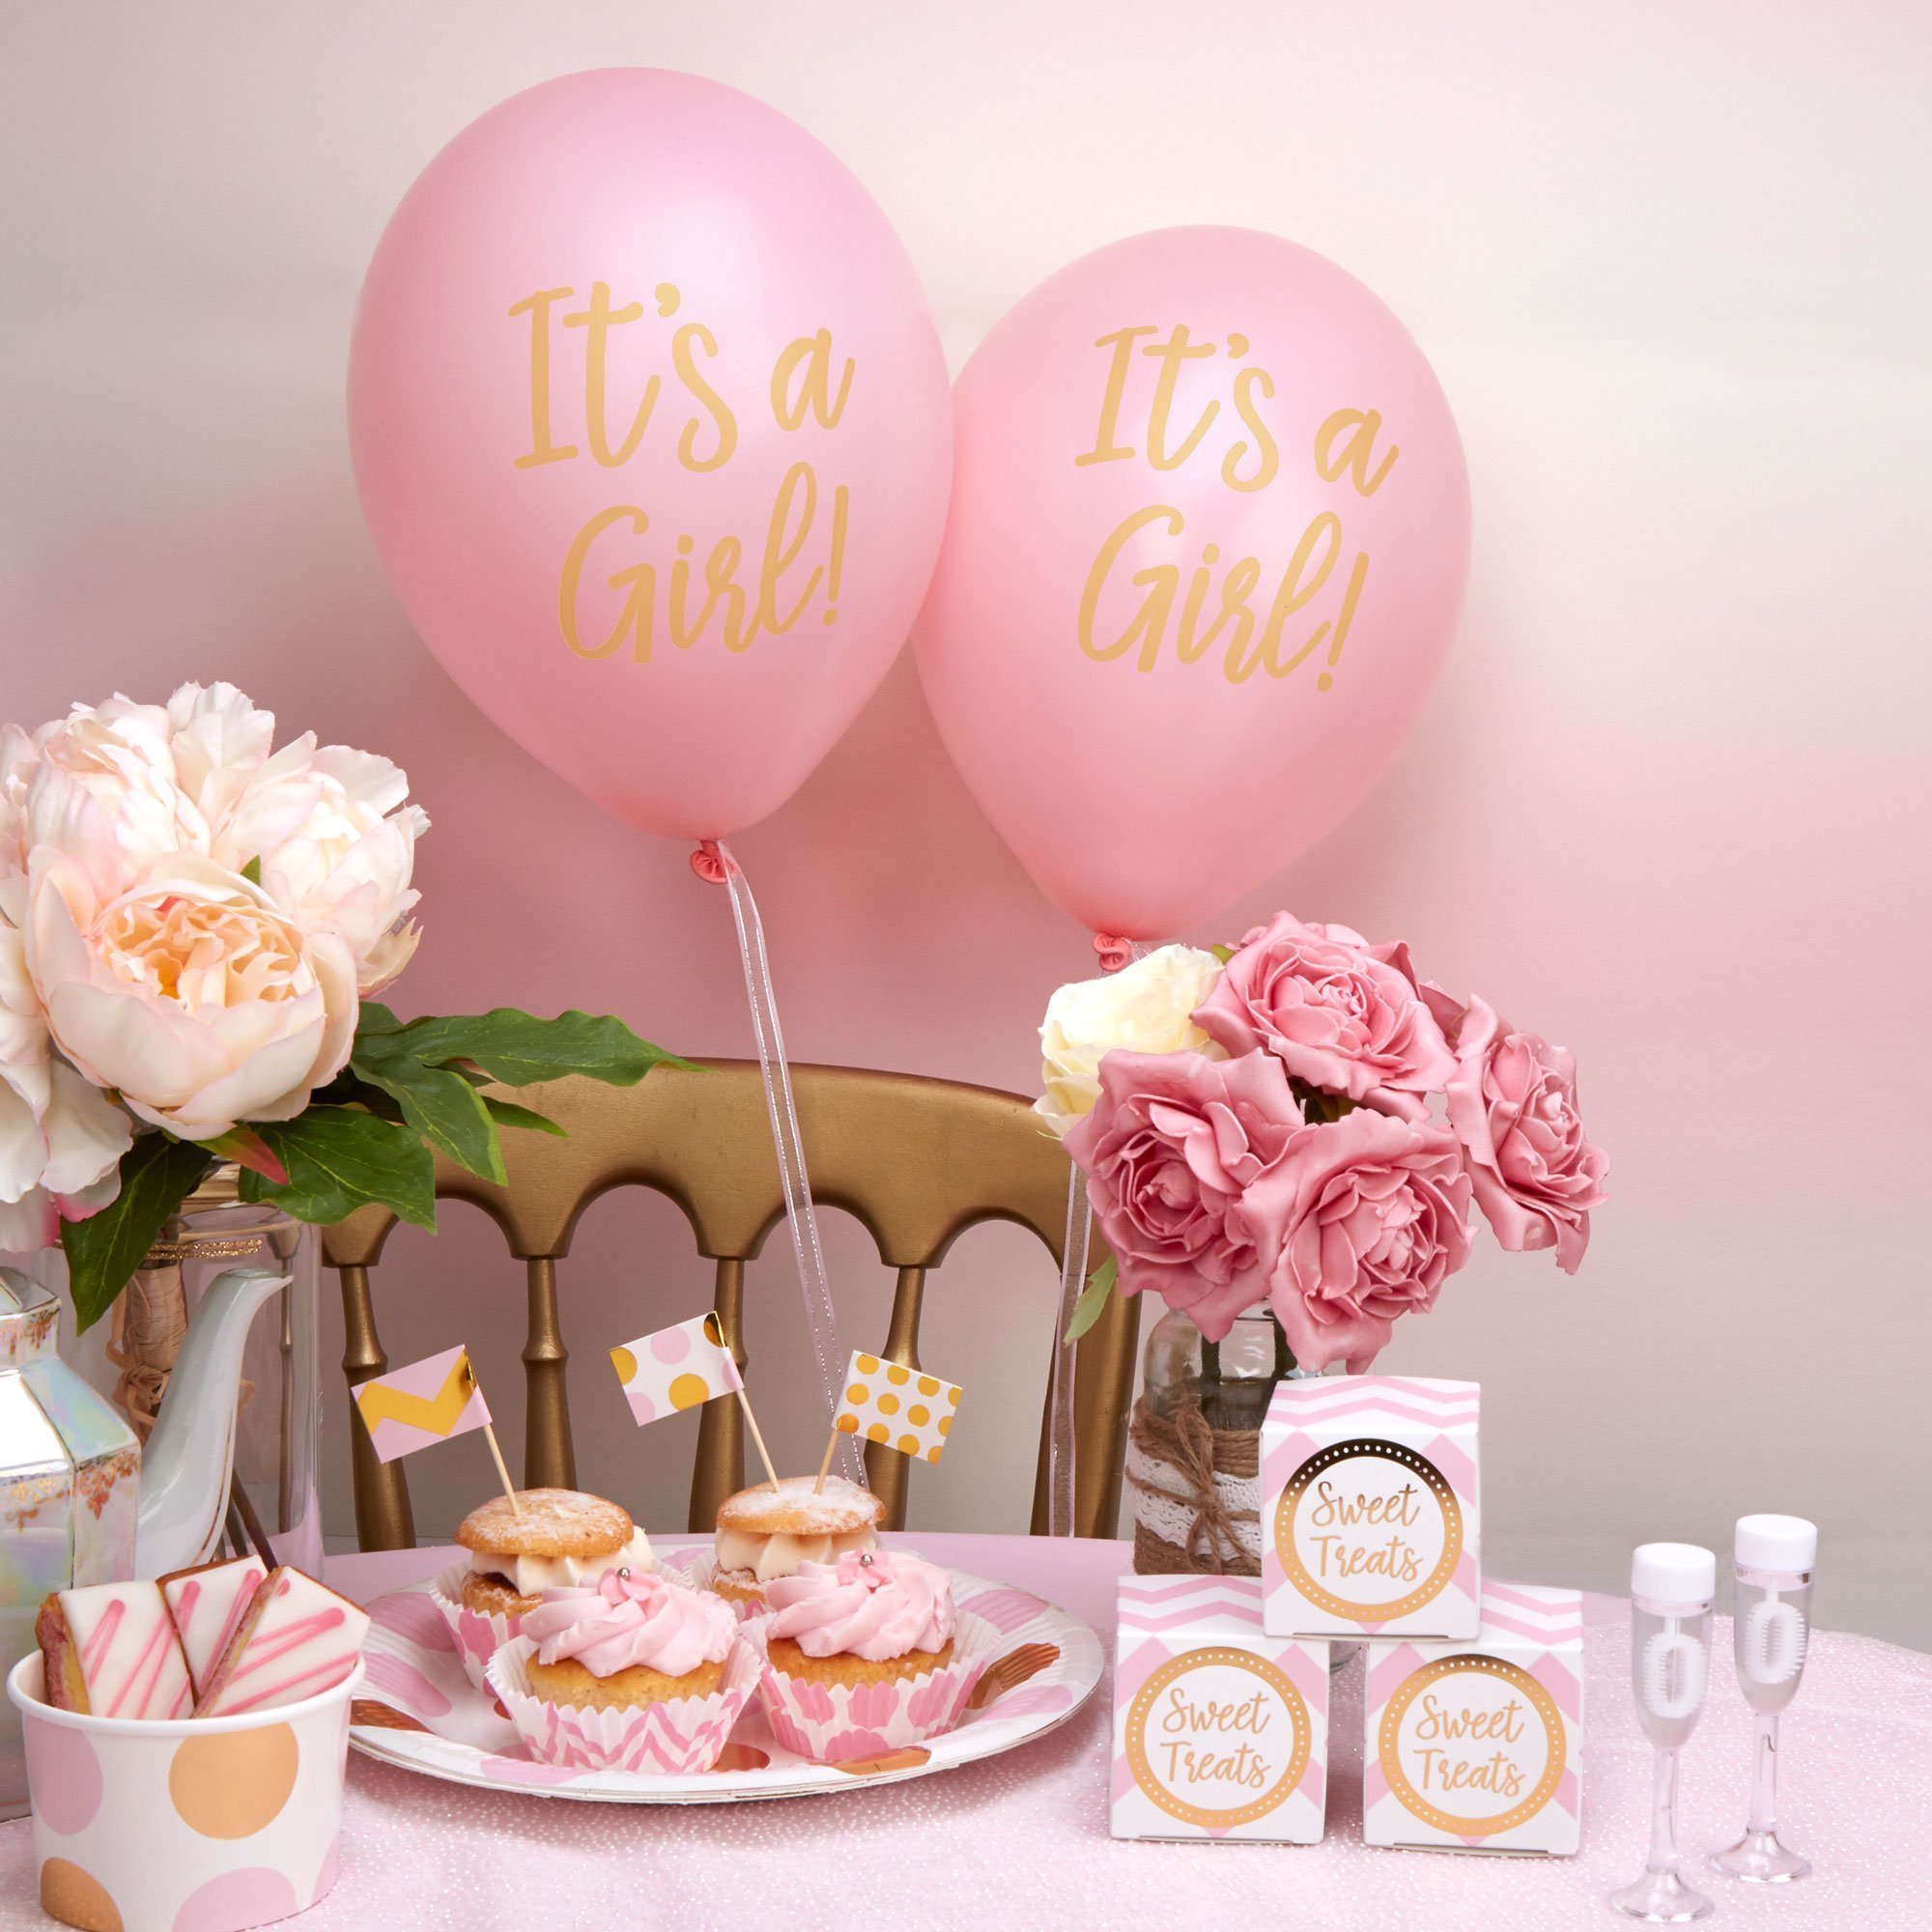 Idée Baby Shower : notre top 10 - Les Bambetises - Les Bambetises